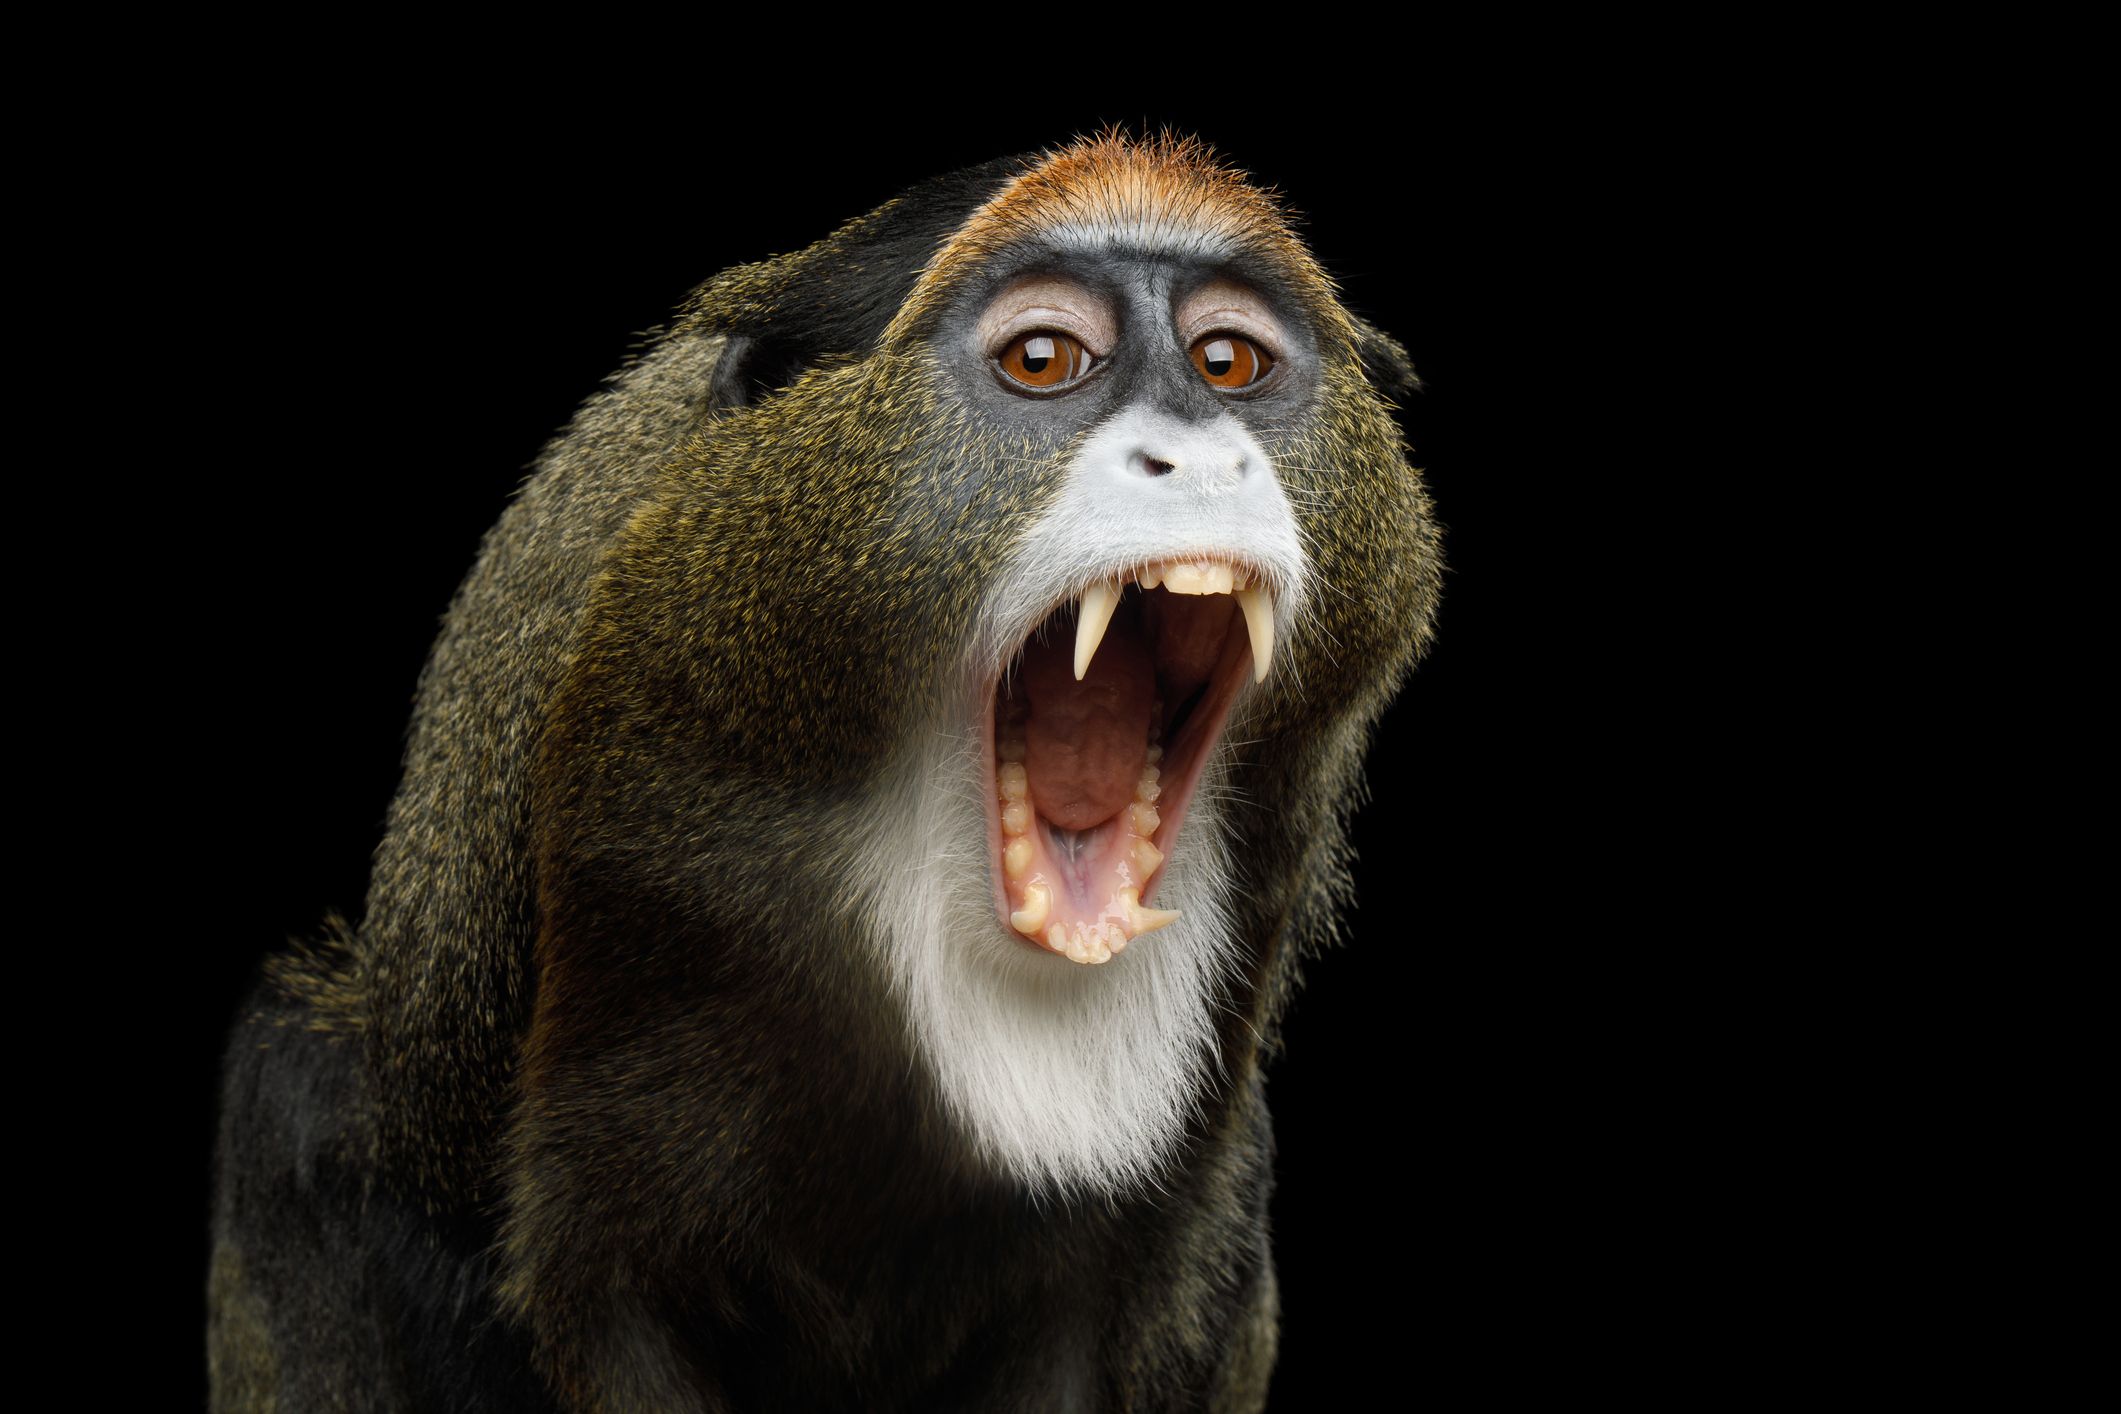 Why Haven't Apes Evolved to Speak?